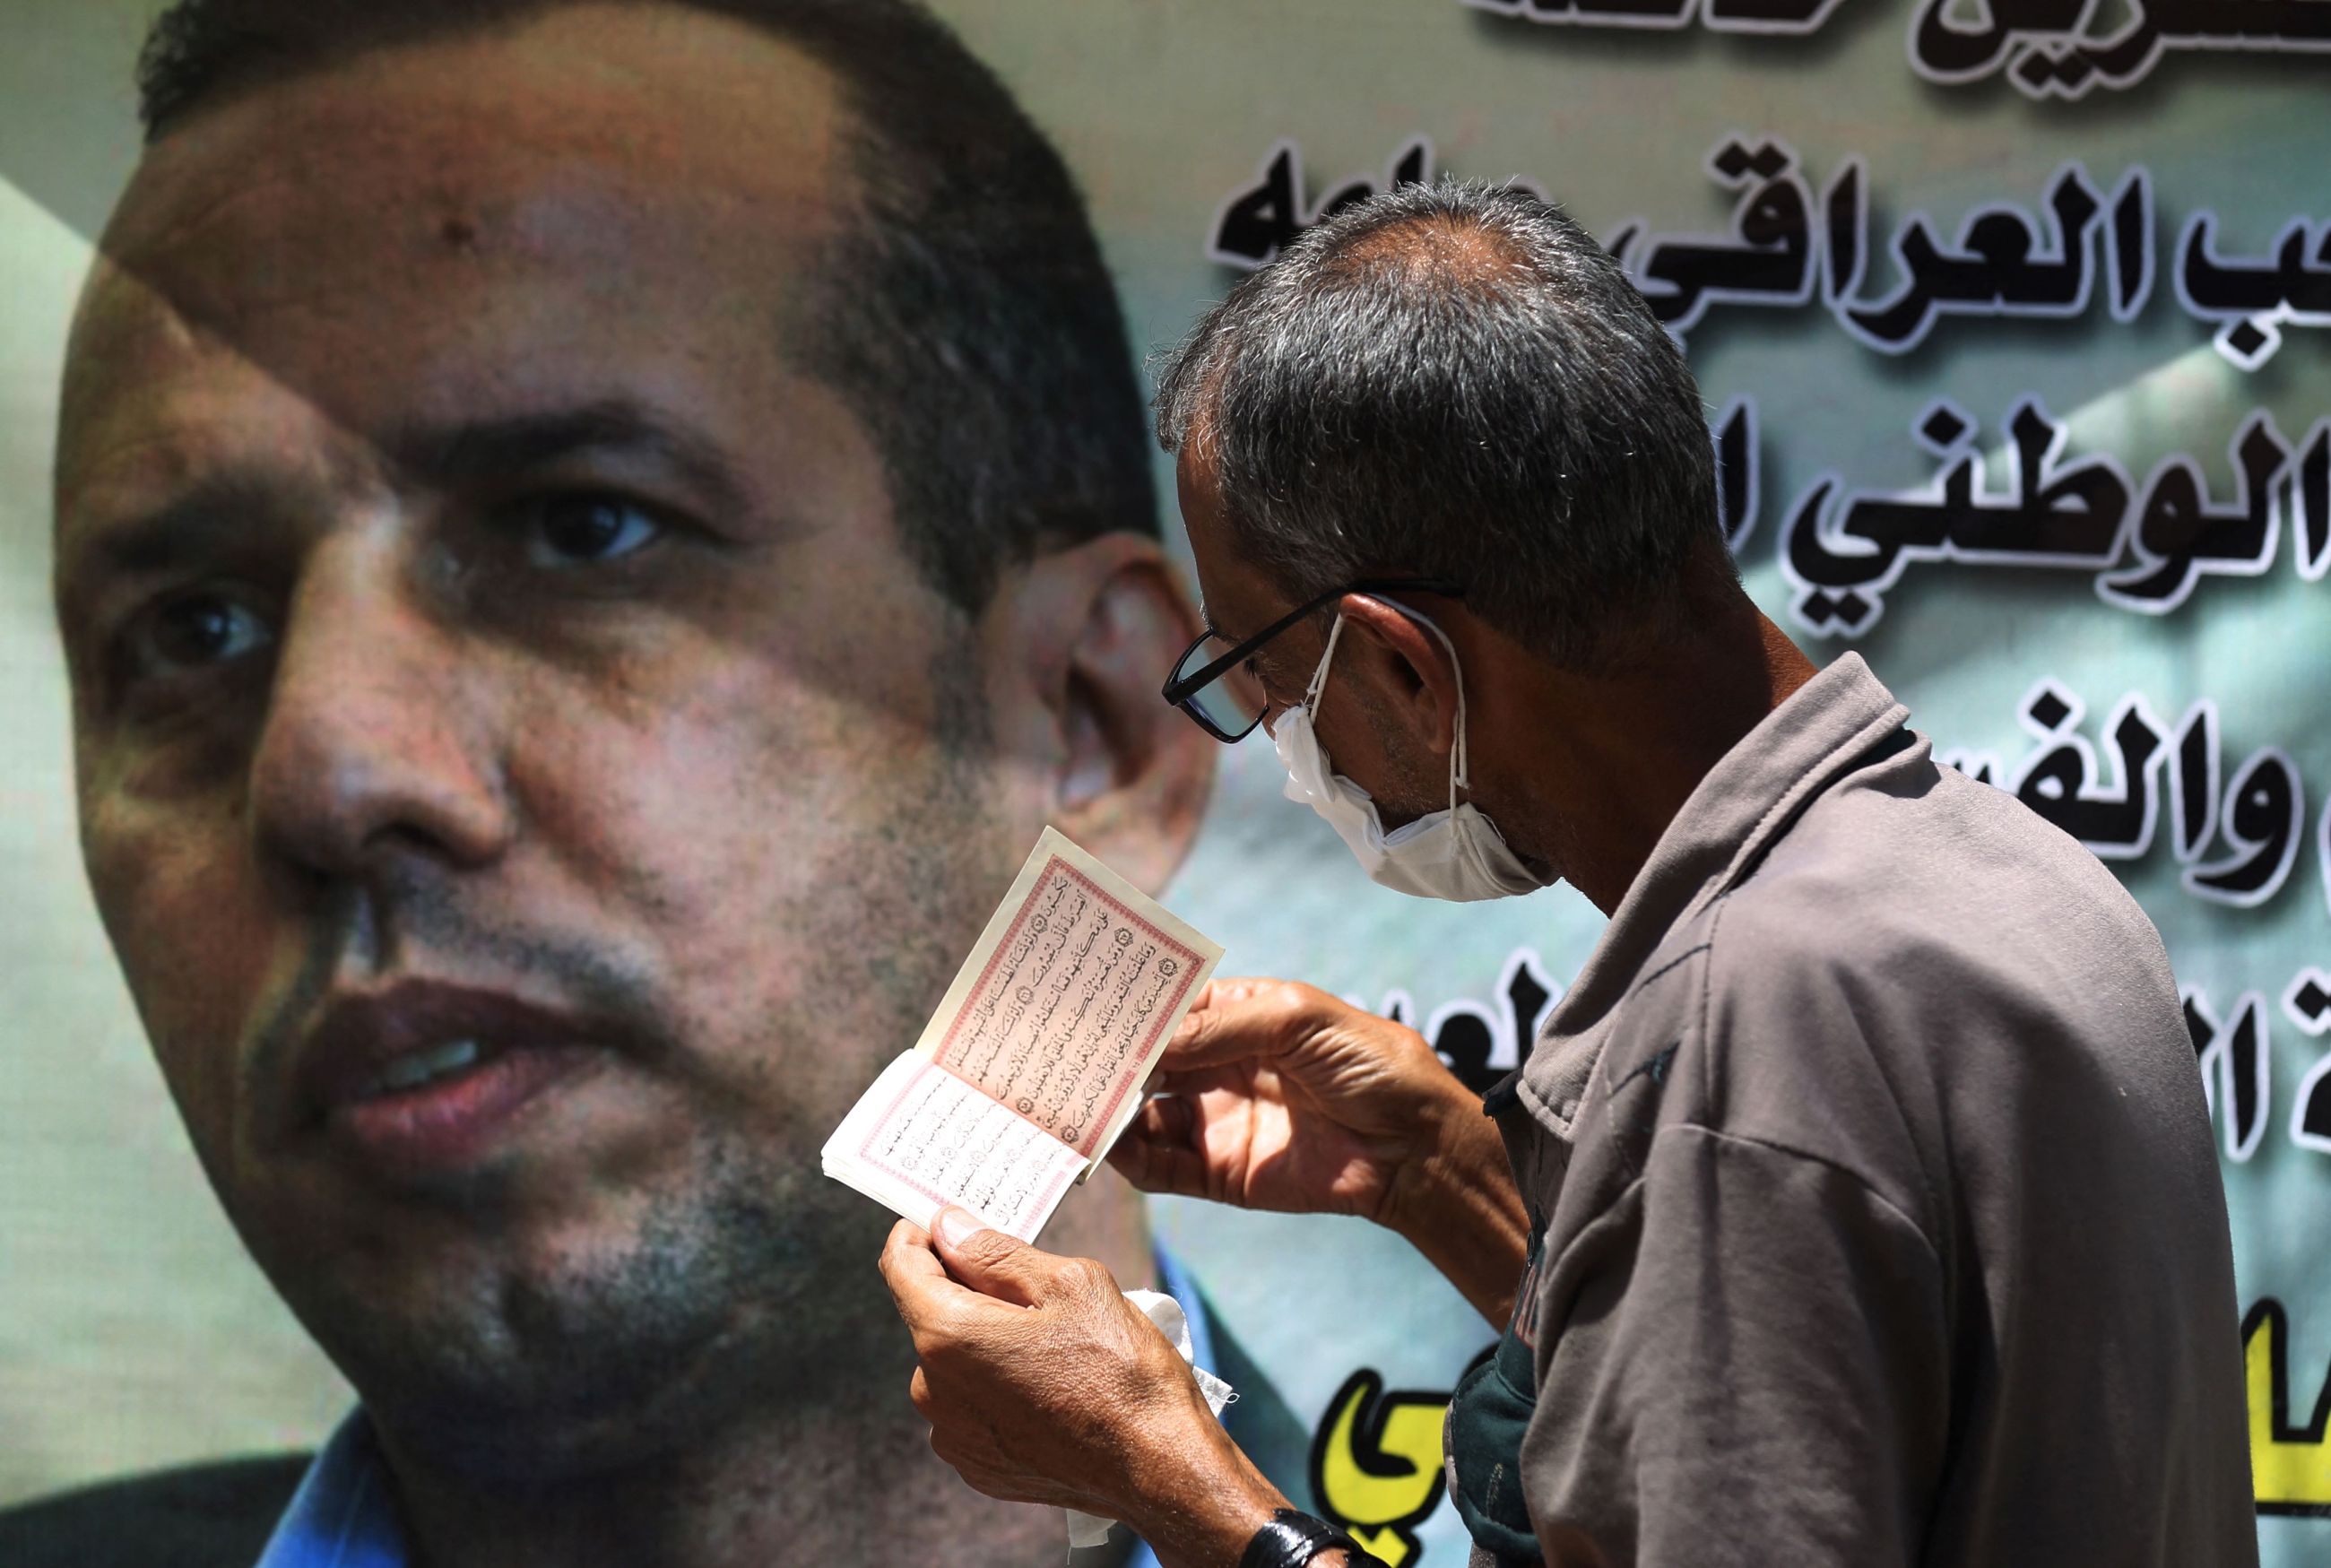 An Iraqi man recites verses from the Koran next to a poster of Iraqi jihadism expert Hisham al-Hashemi, who was shot dead outside his house in the Iraqi capital last week, during a protest in the capital Baghdad on July 12, 2020 to demand a curb on paramilitary groups and restricting the use of weapons to government security forces (AFP)